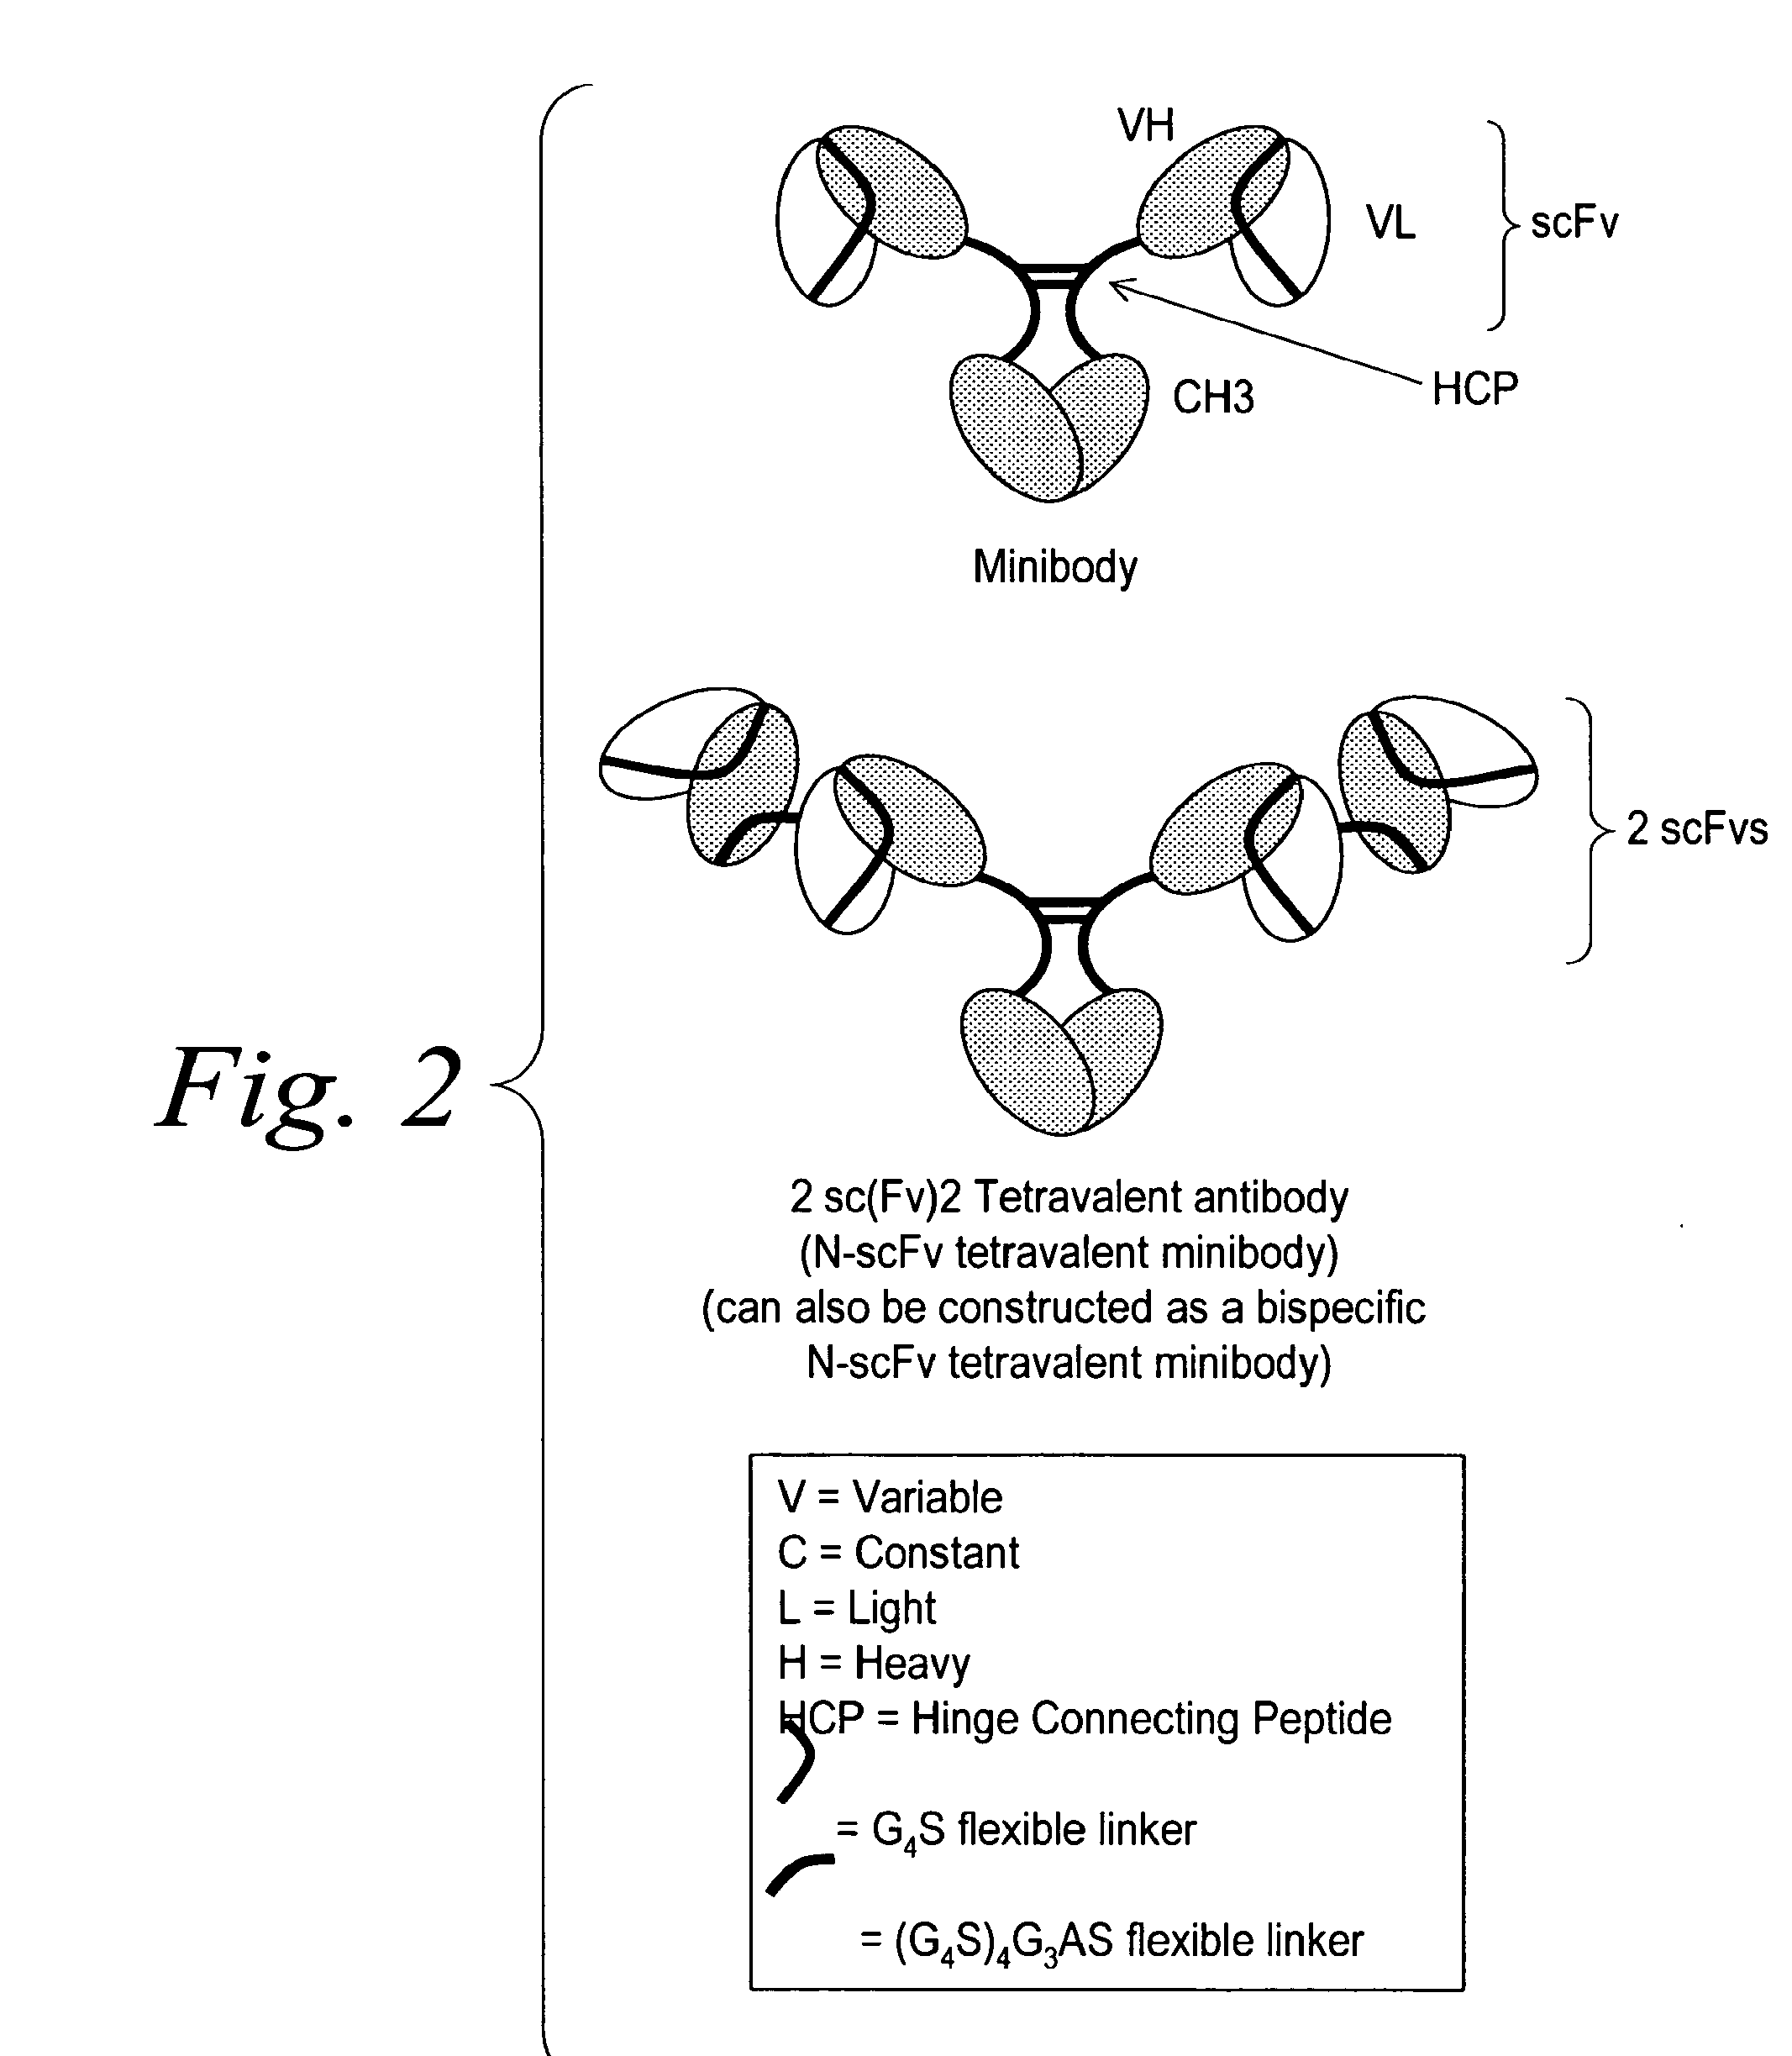 Modified binding molecules comprising connecting peptides